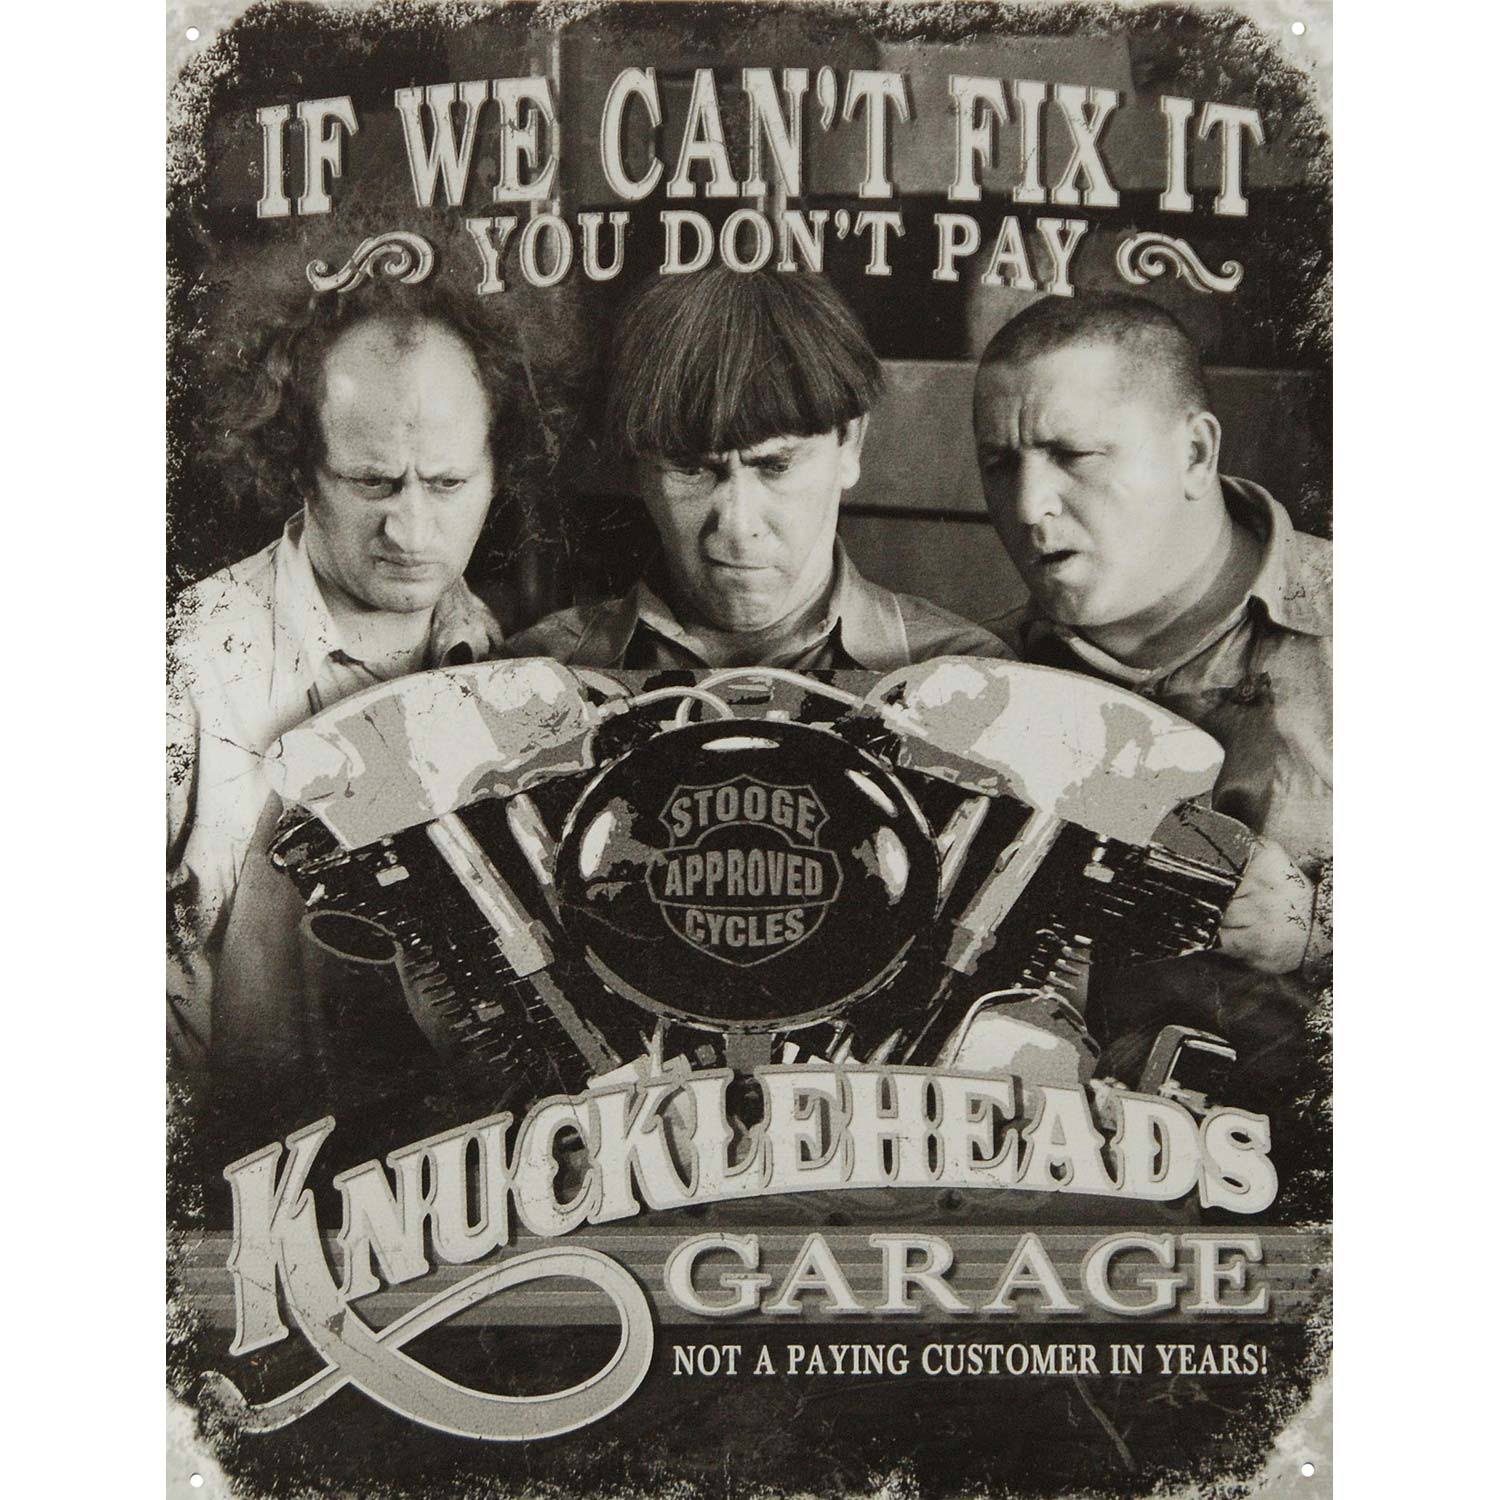 Desperate Enterprises Three Stooges Knuckleheads Garage Classic Tin Signs - 16" x 13", Multi-colored